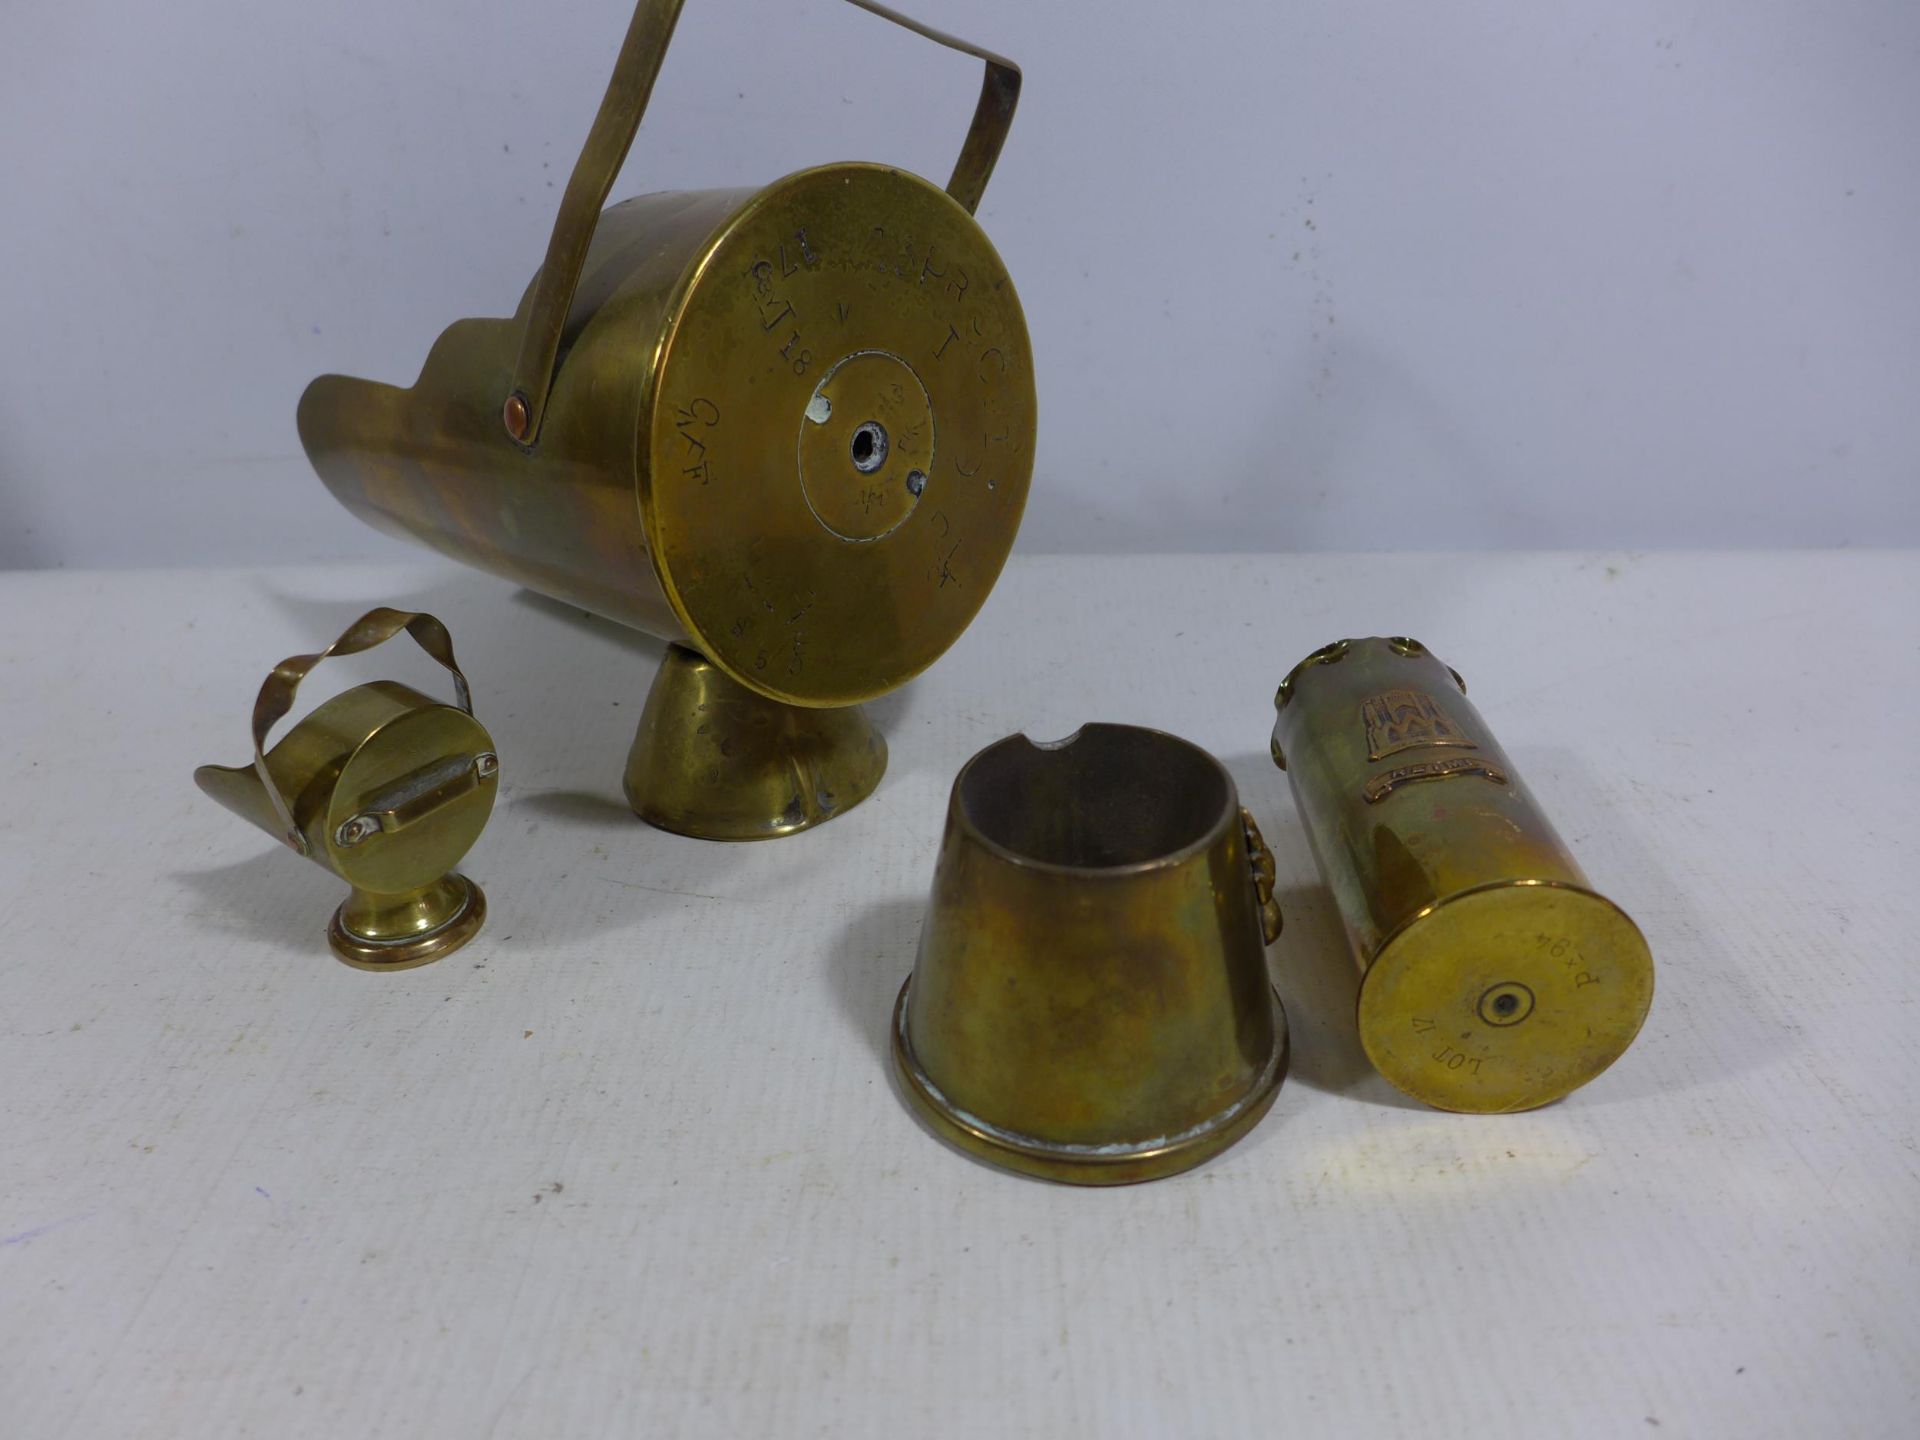 FOUR BRASS WORLD WAR I TRENCH ART ITEMS, TO INCLUDE TWO HELMET SHAPED MINIATURE COAL BUCKETS - Image 2 of 5